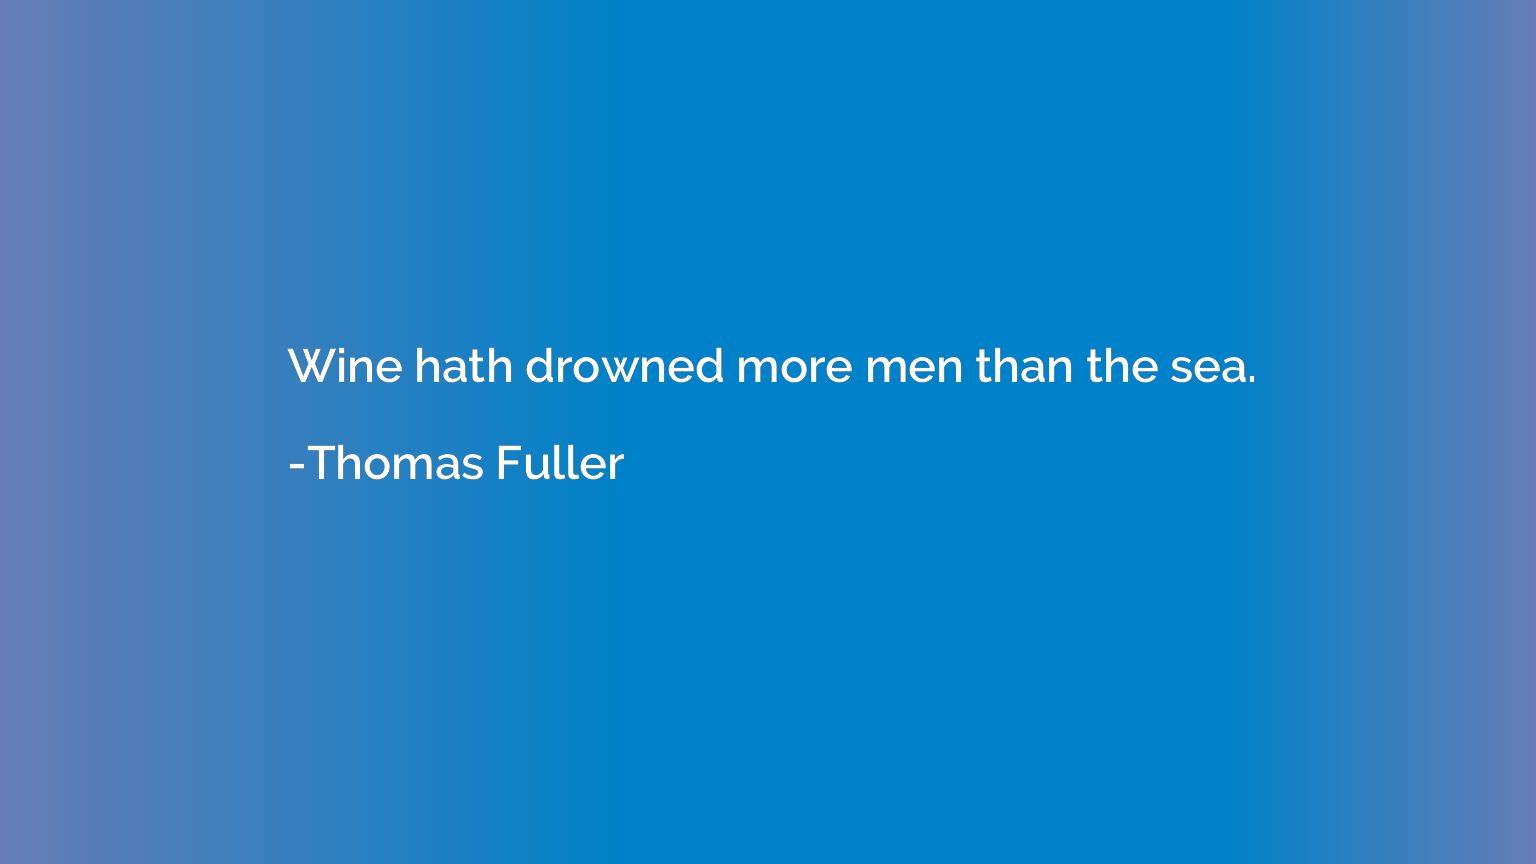 Wine hath drowned more men than the sea.